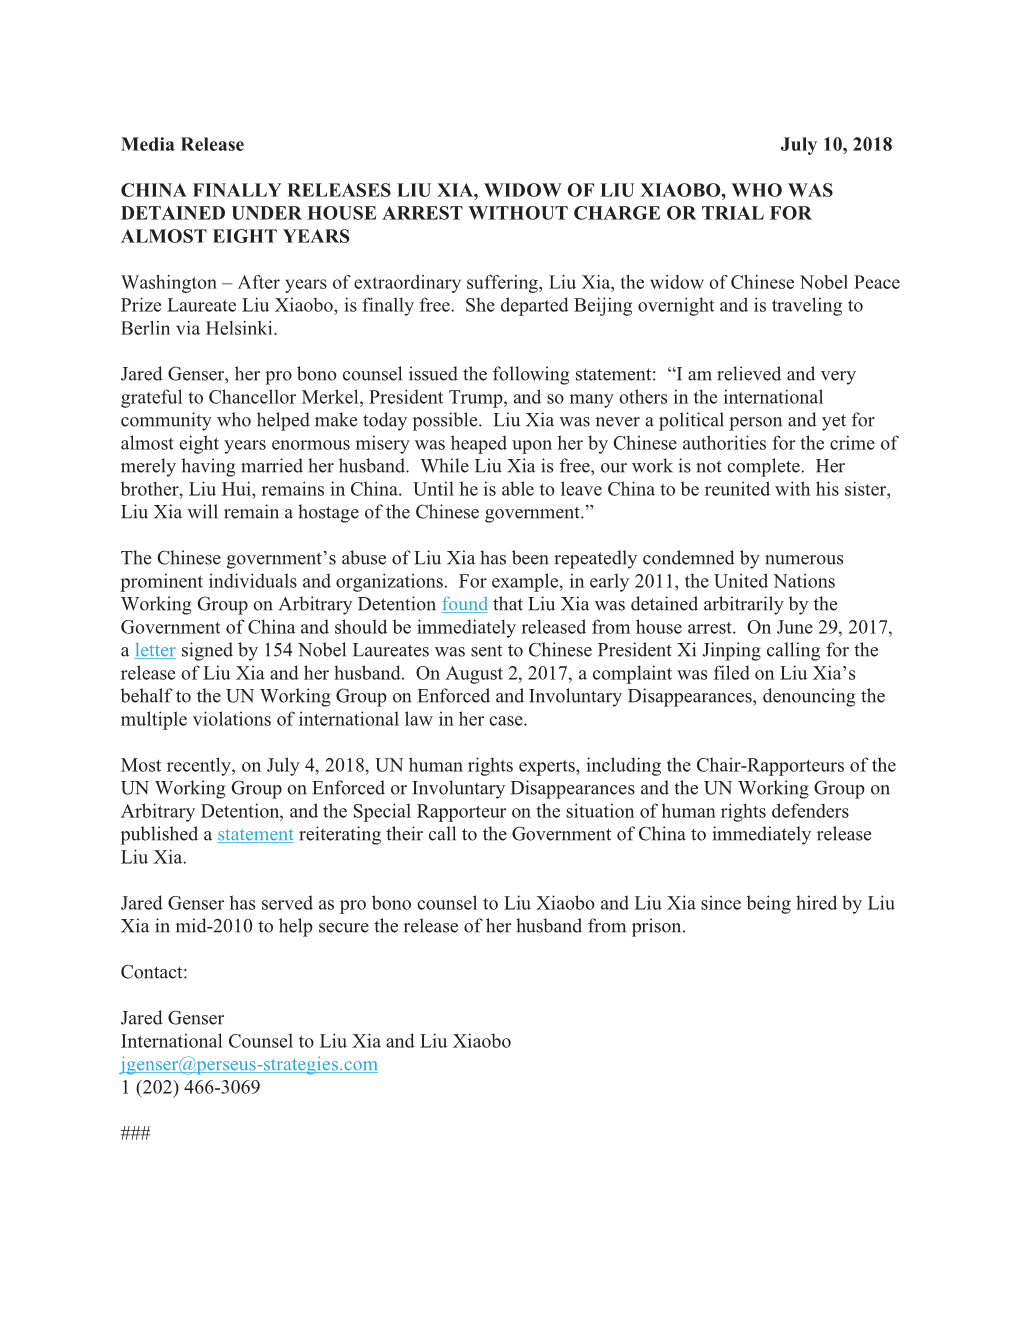 Media Release Announcing China Finally Releases Liu